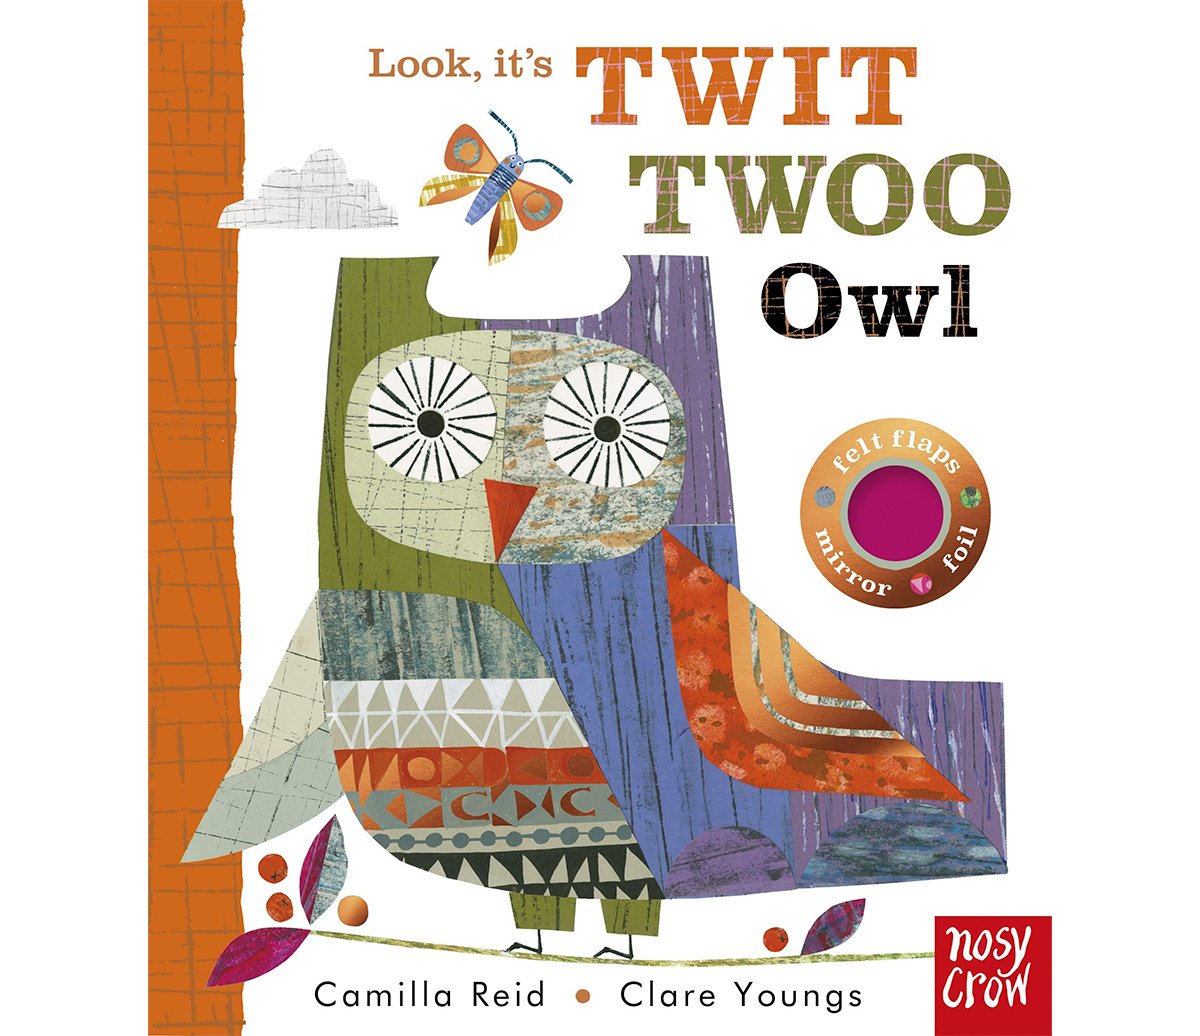 clare-youngs-twit-twoo-owl.jpg